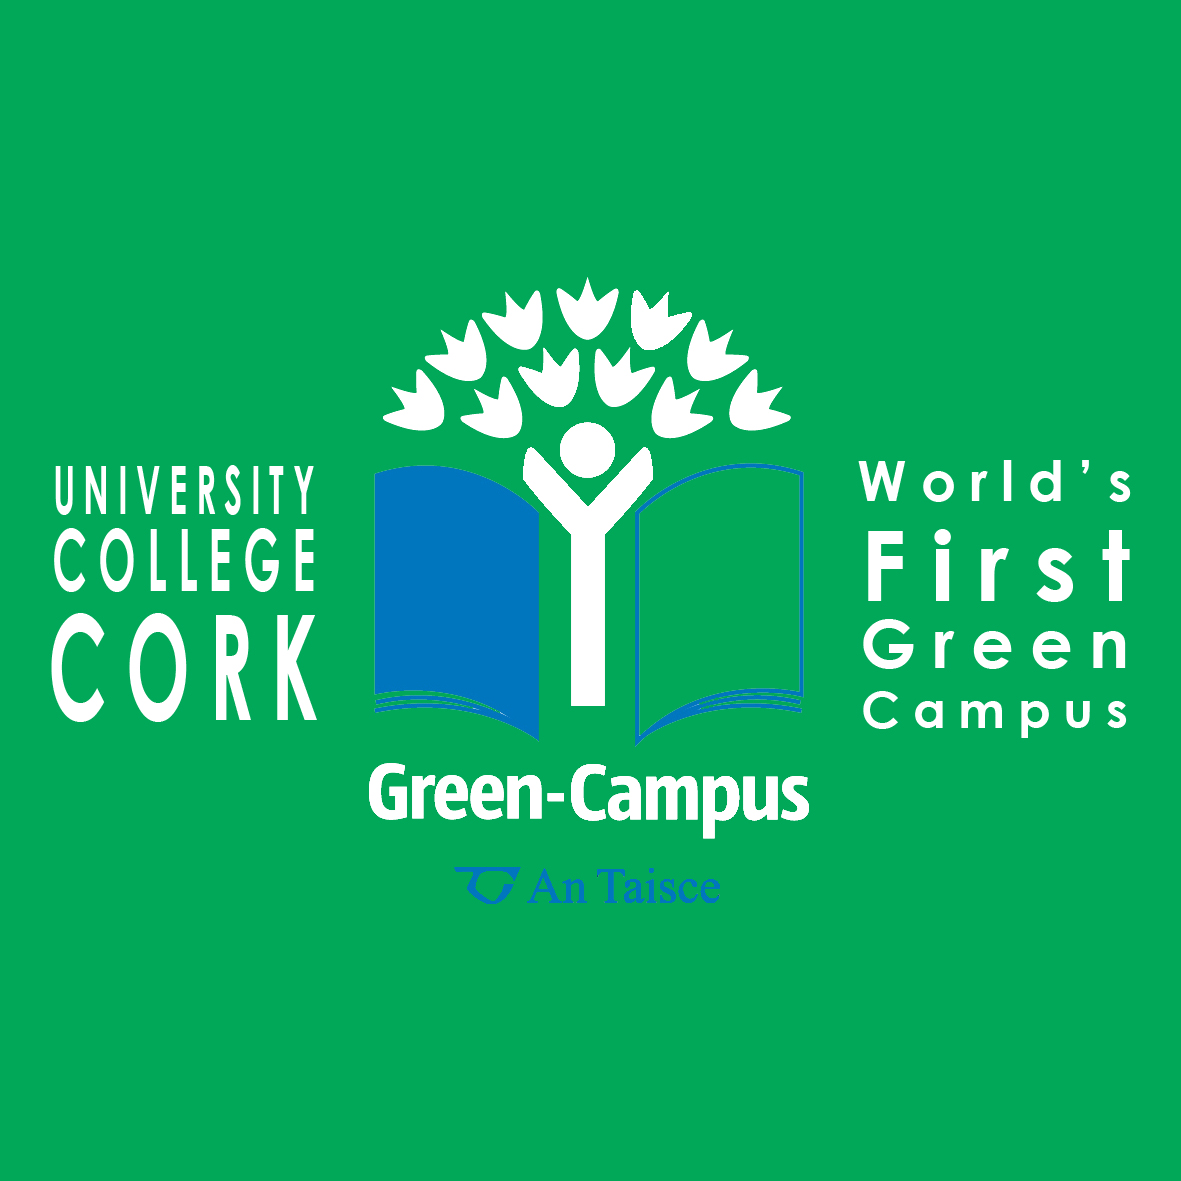 2nd Place for UCC in UI Green Metric University Rankings